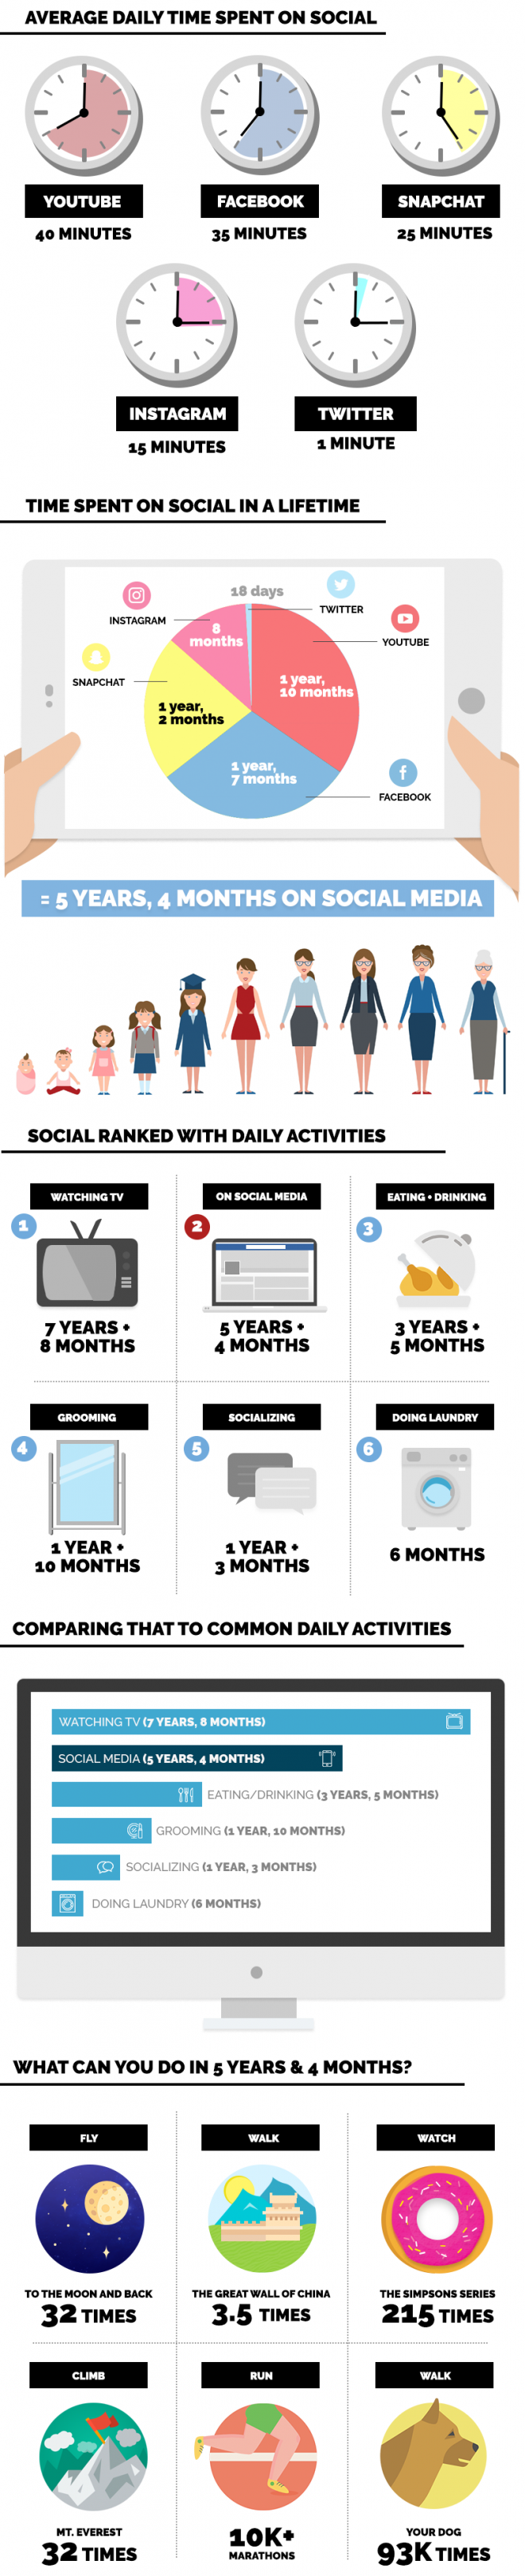 How much time do we spend on social networks?